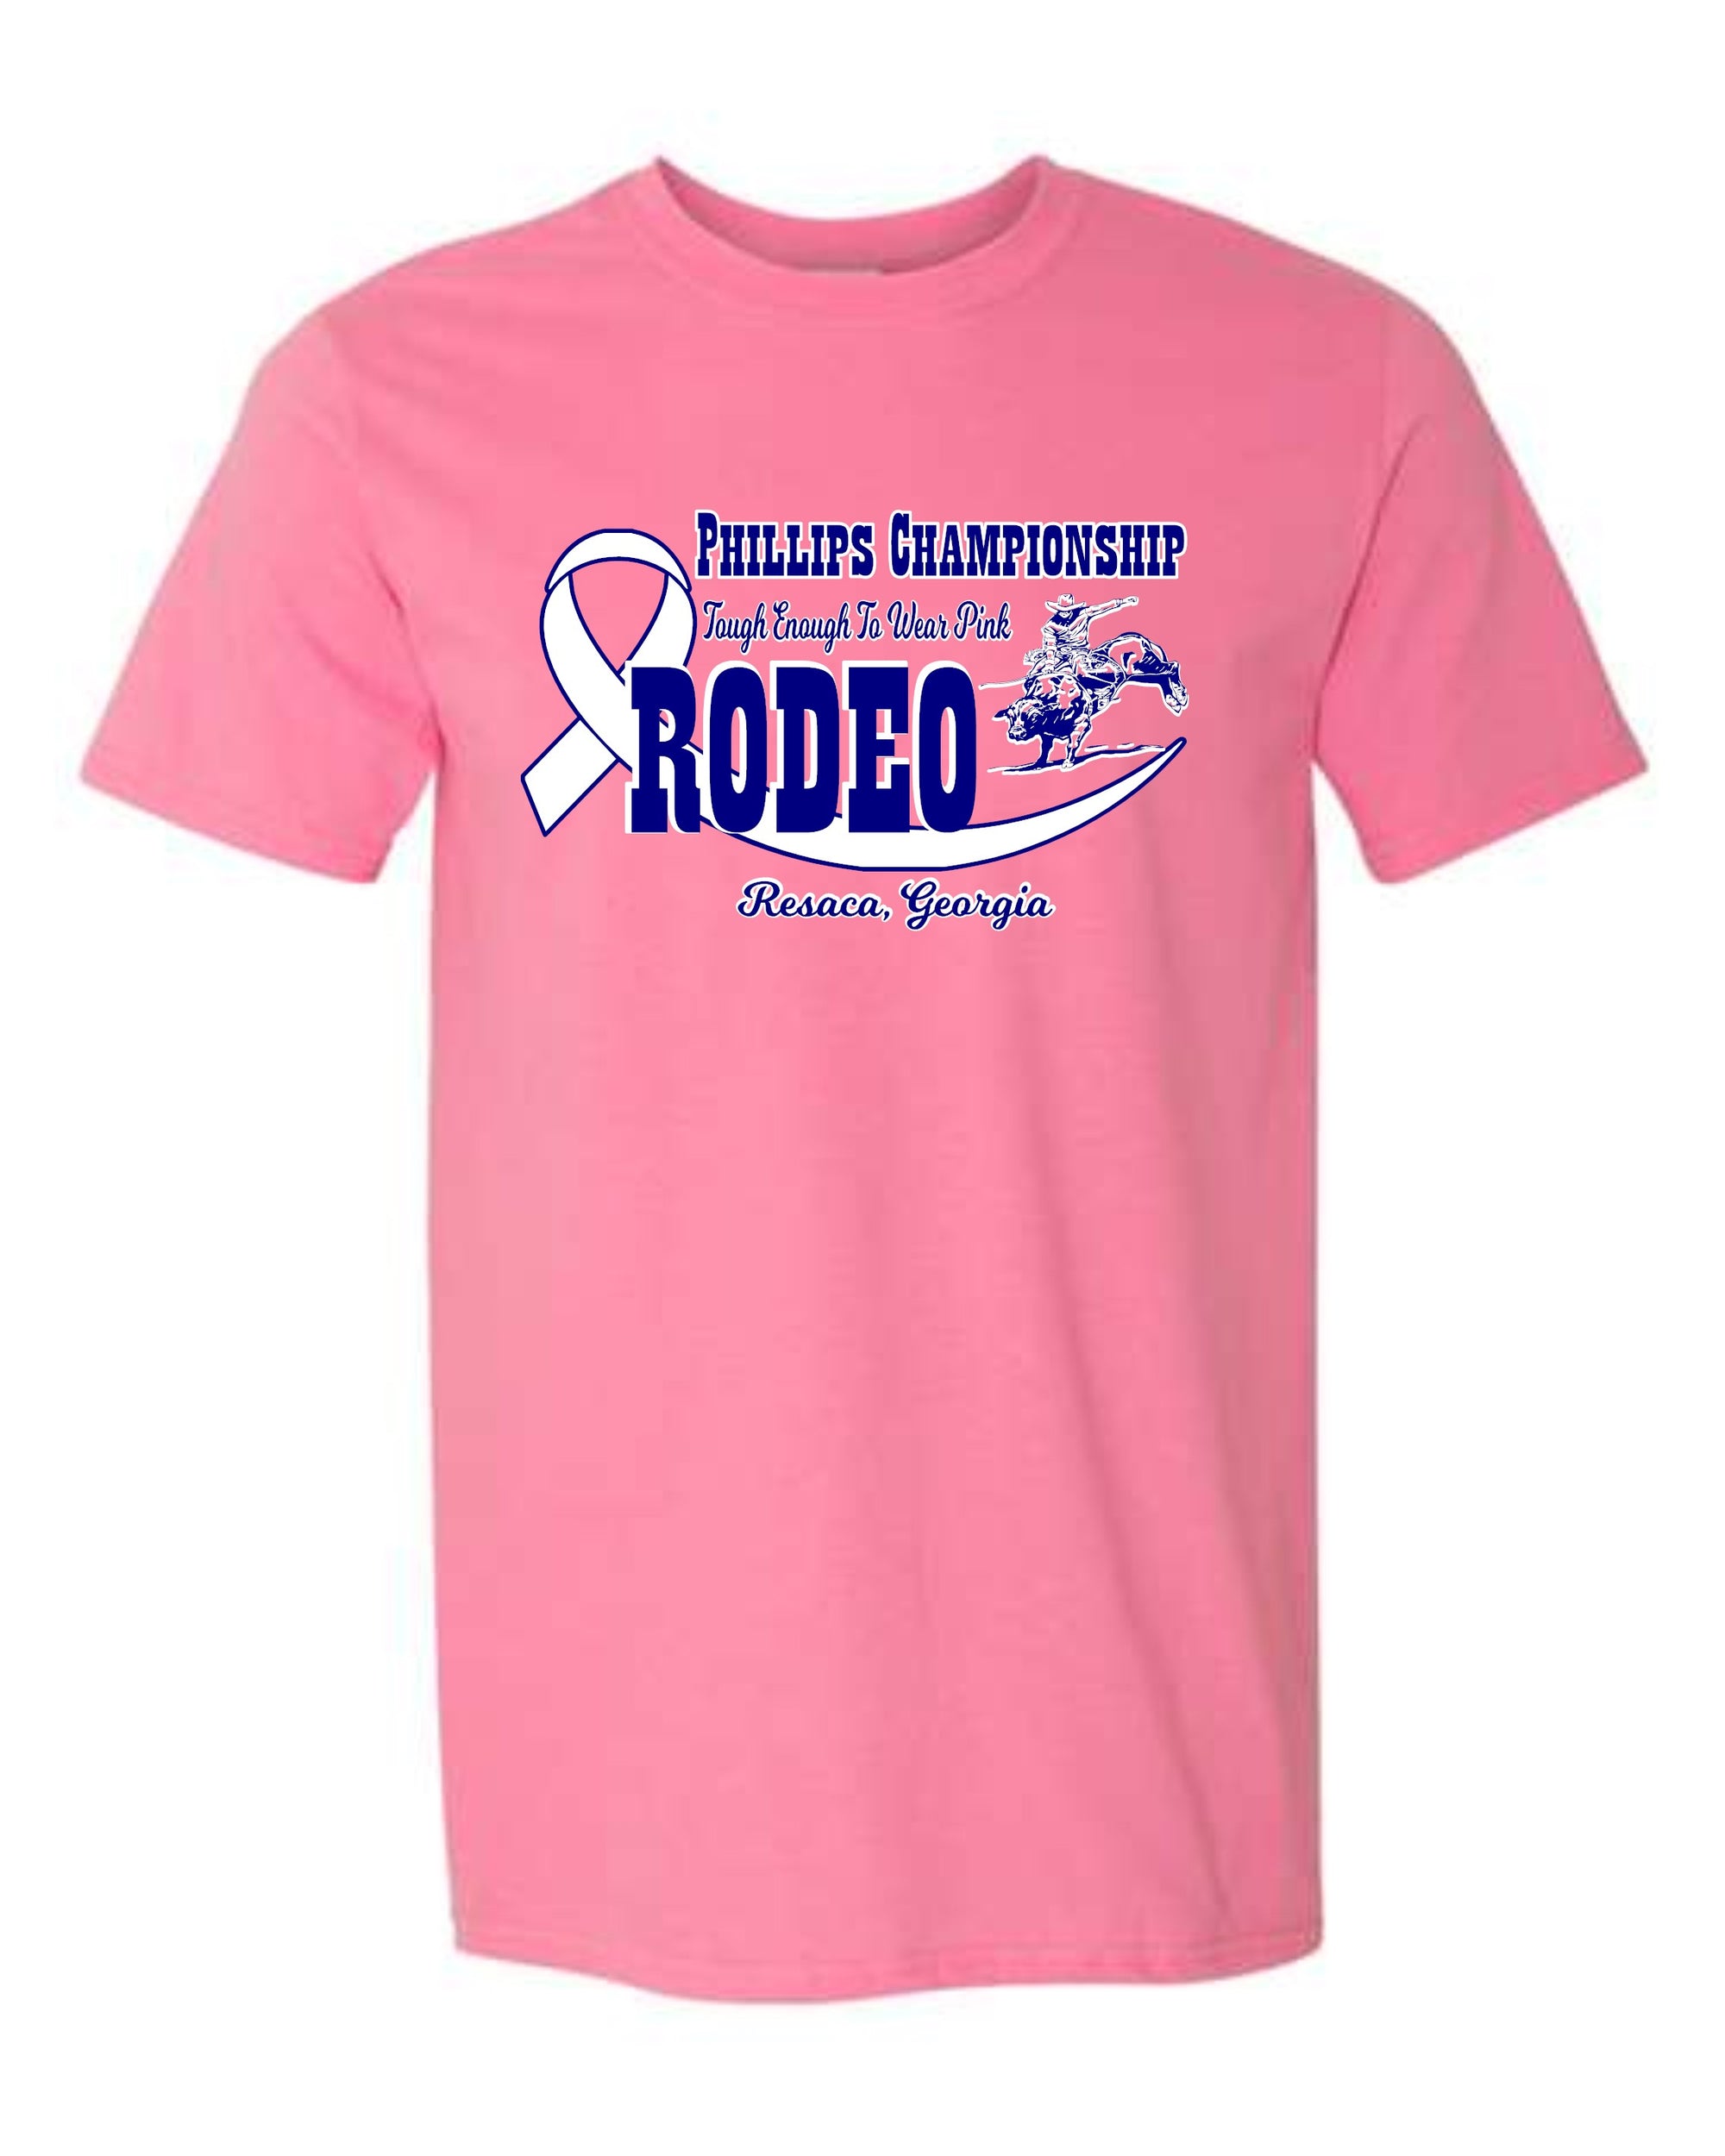 Phillips Championship Rodeo Tough Enough to Wear Pink T Shirt